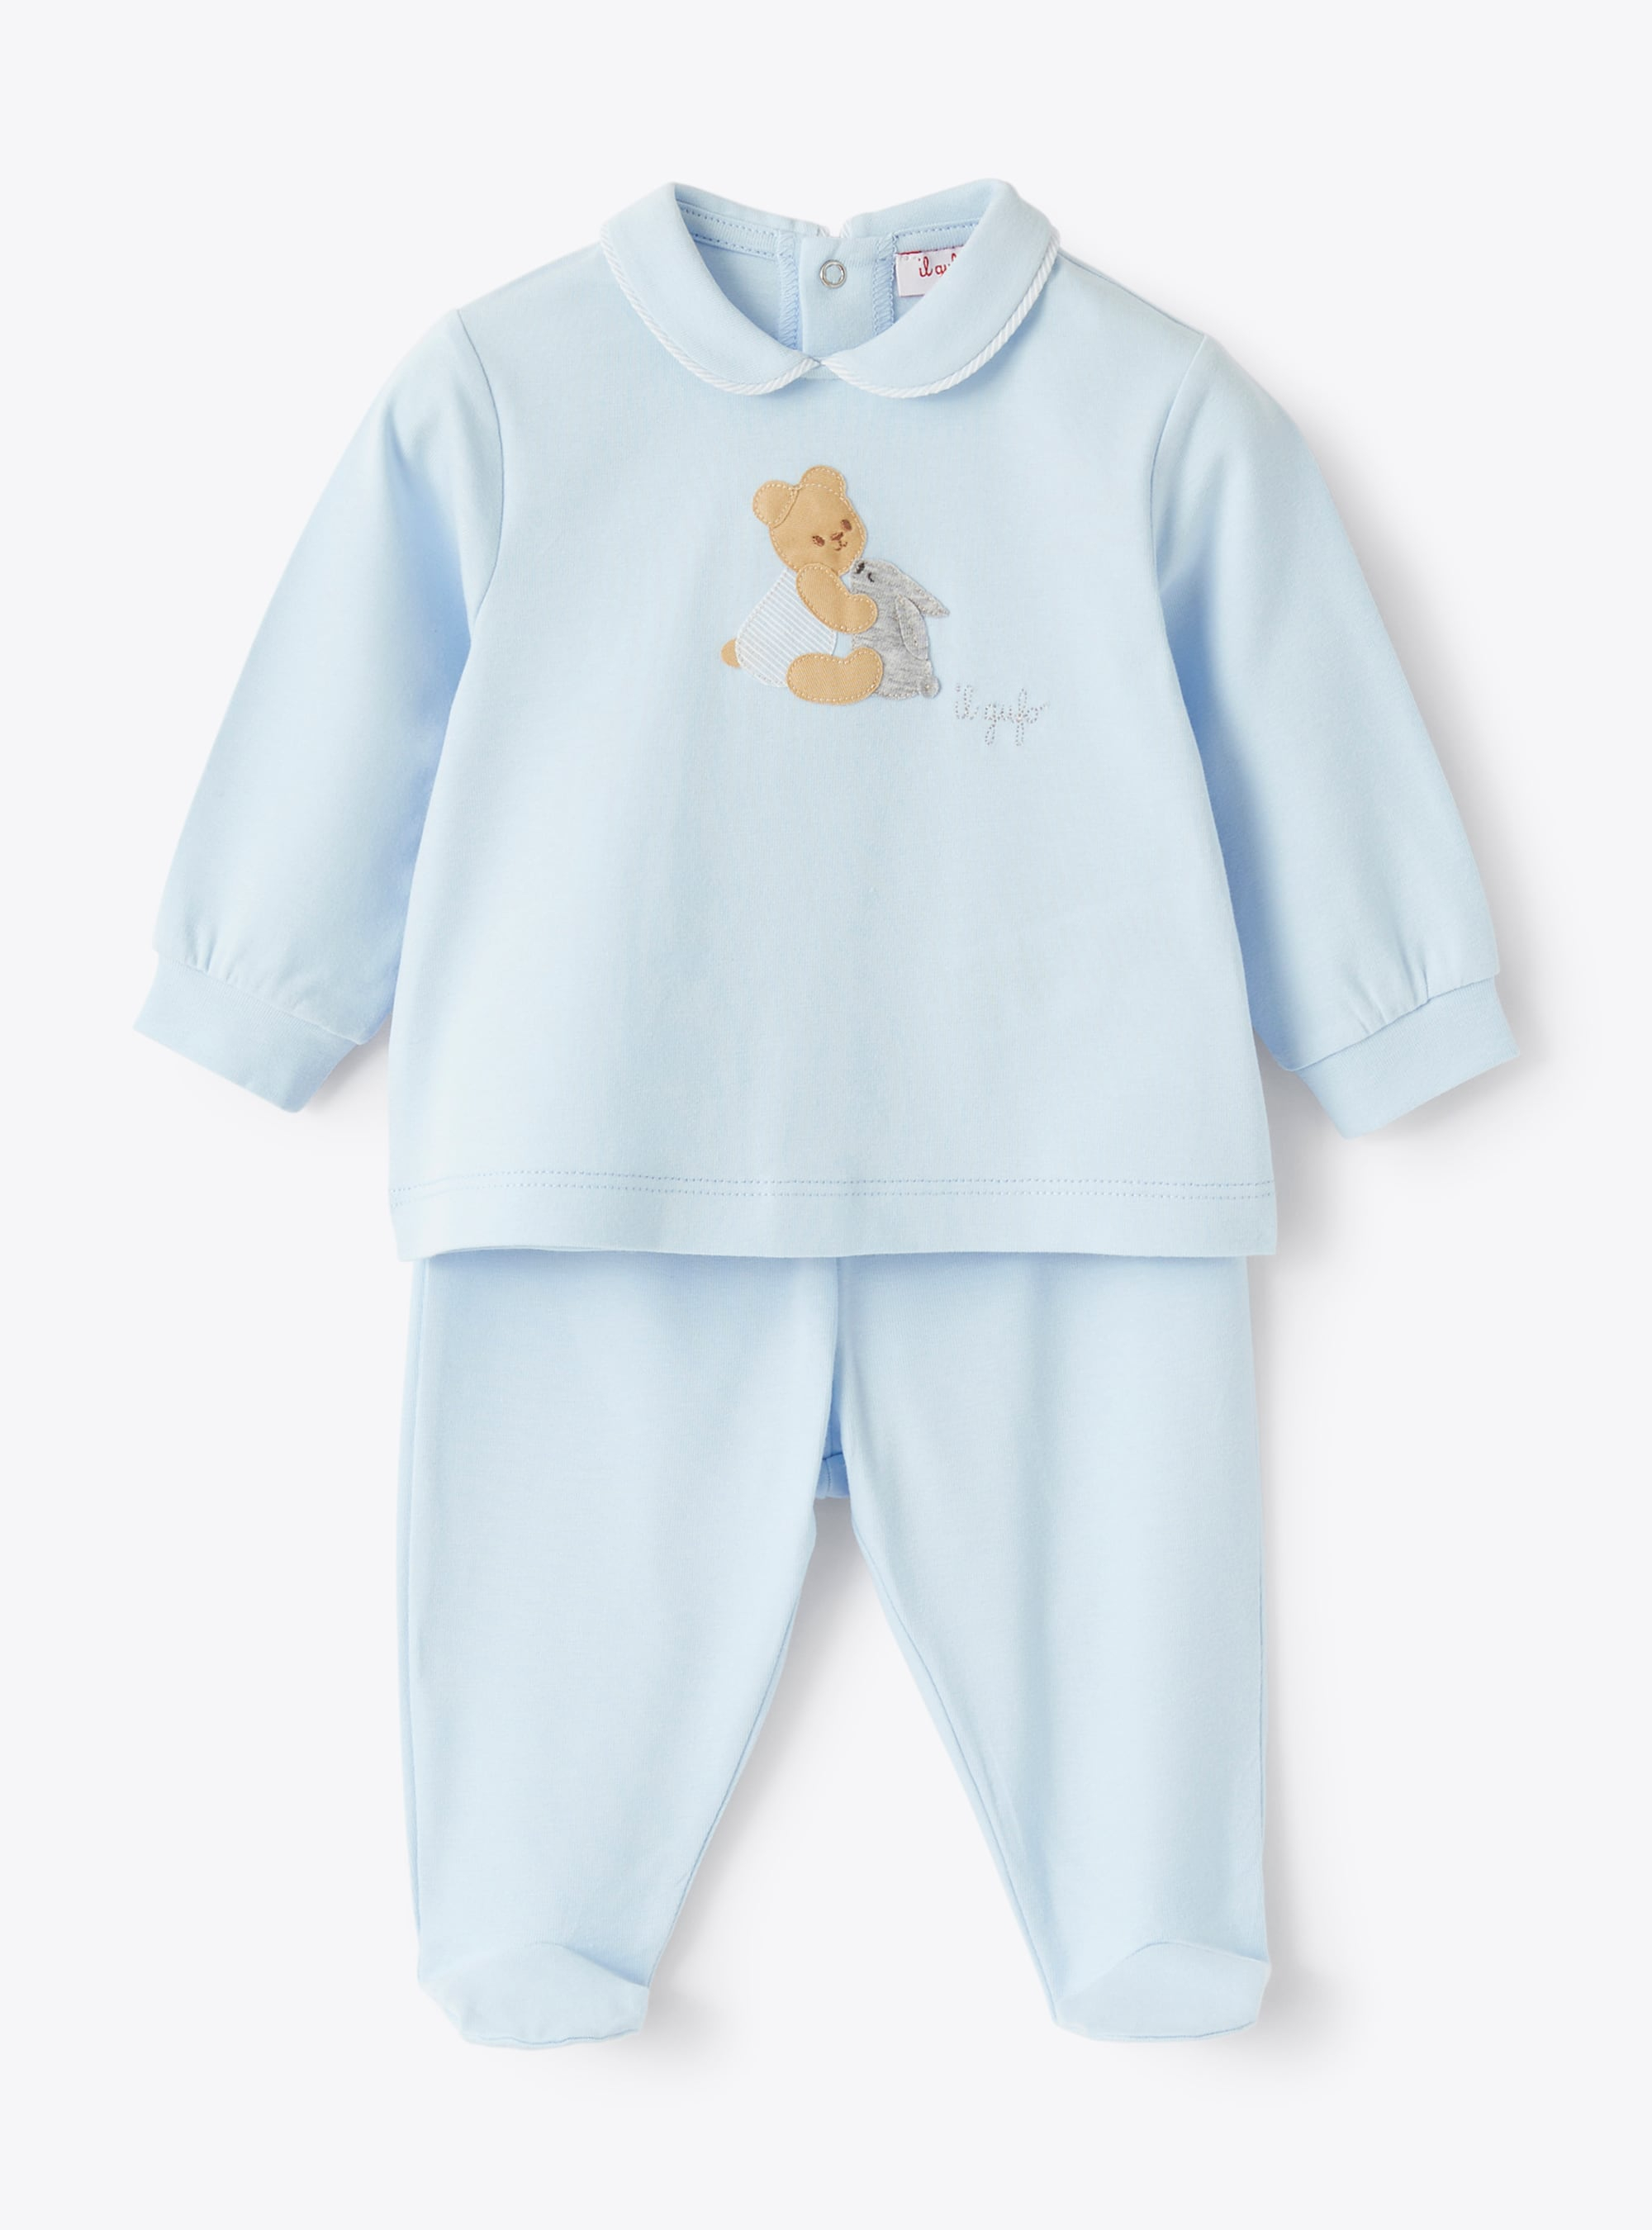 Romper suit in light blue with bear - Two-piece sets - Il Gufo